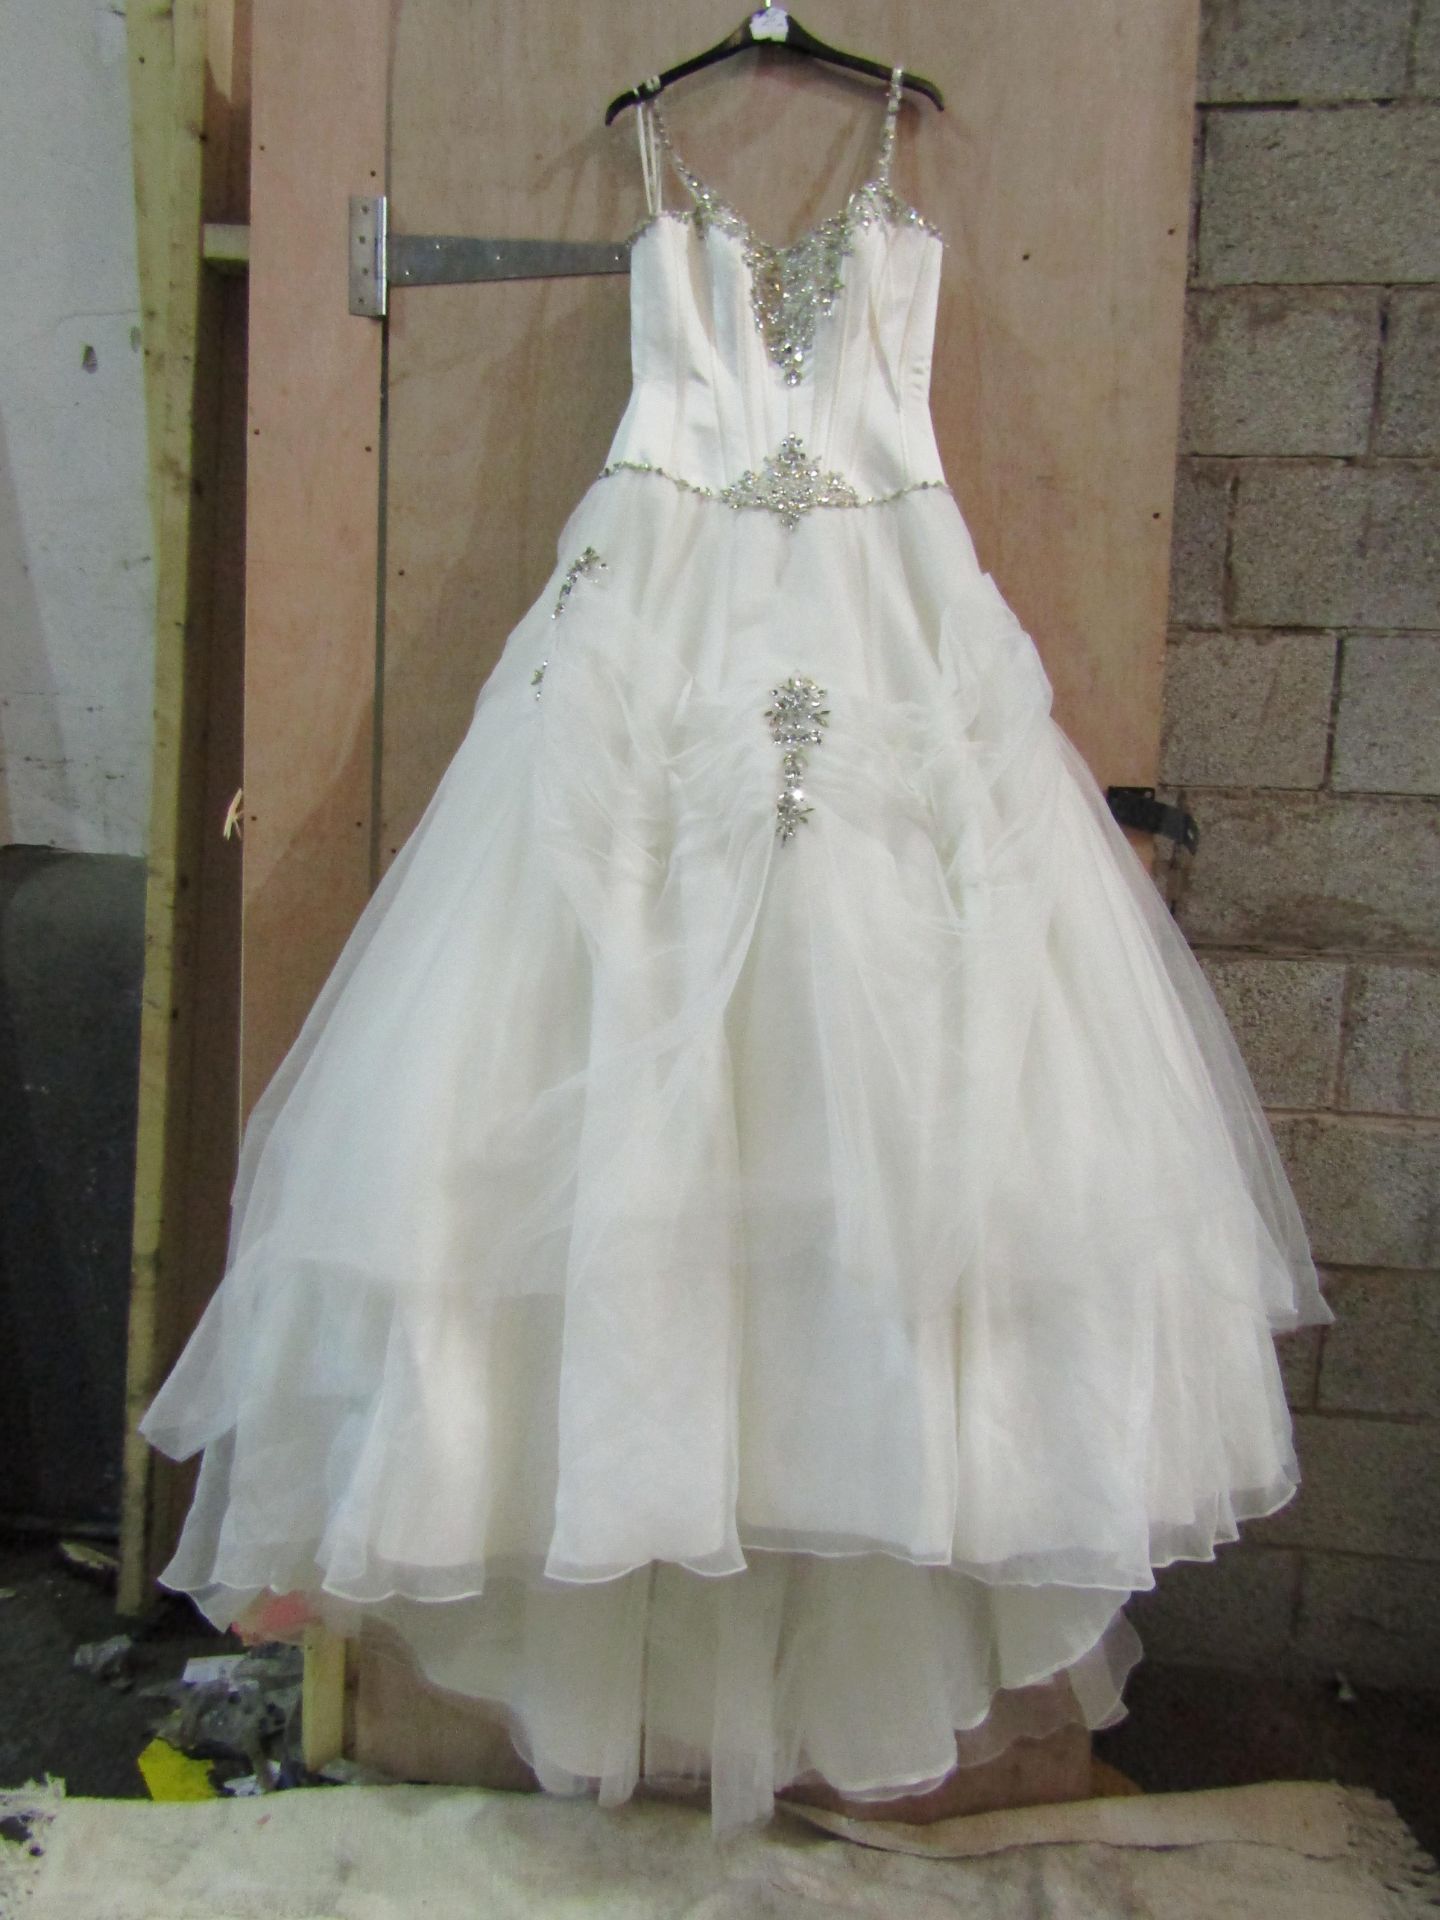 Approx 500 pieces of wedding shop stock to include wedding dresses, mother of the bride, dresses, - Image 52 of 71